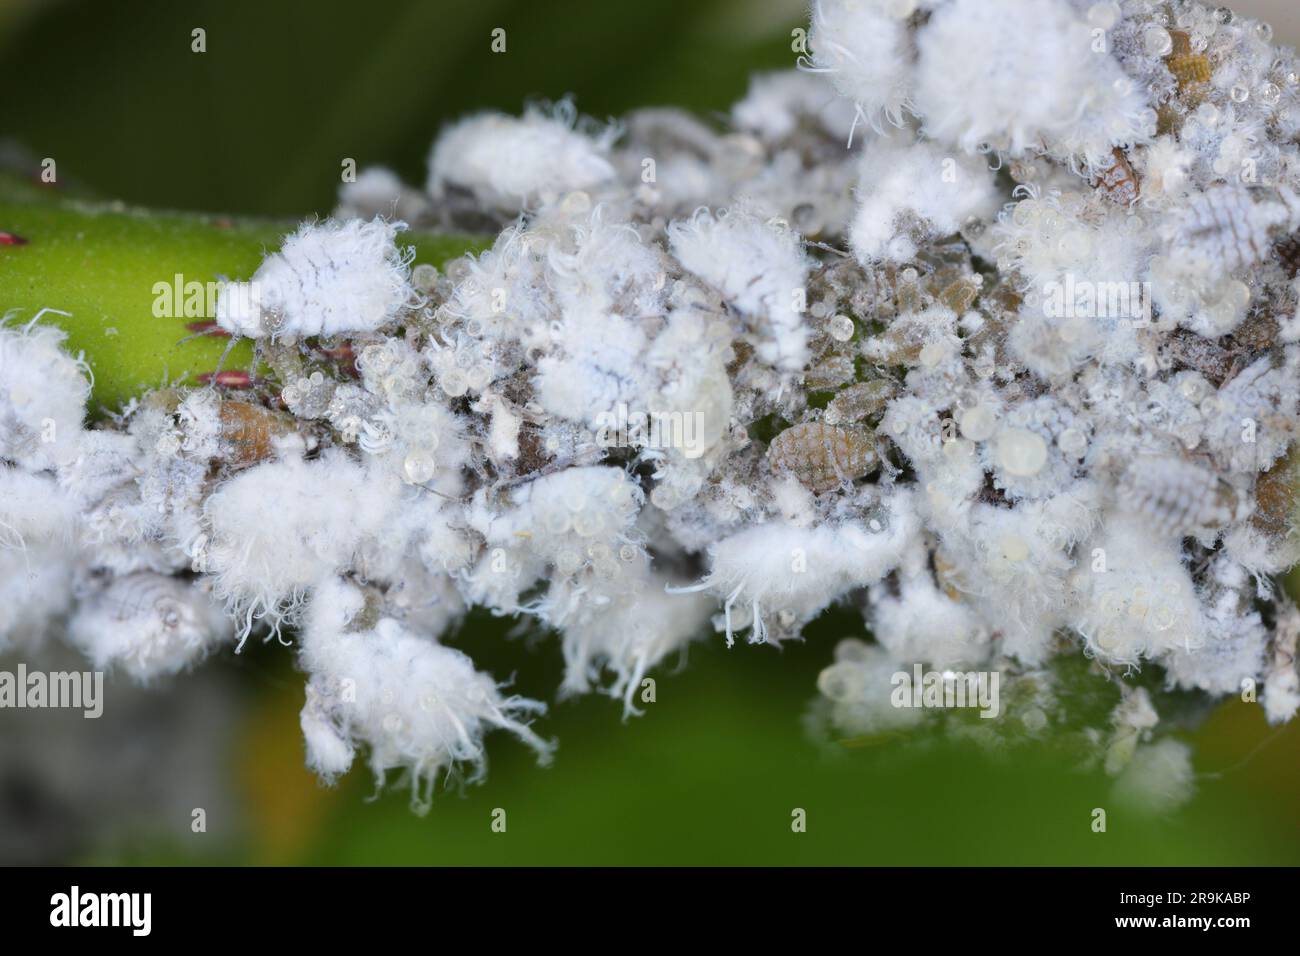 Prociphilus bumeliae. A colony of hairy, wax-covered aphid secretions on an ash tree. Stock Photo